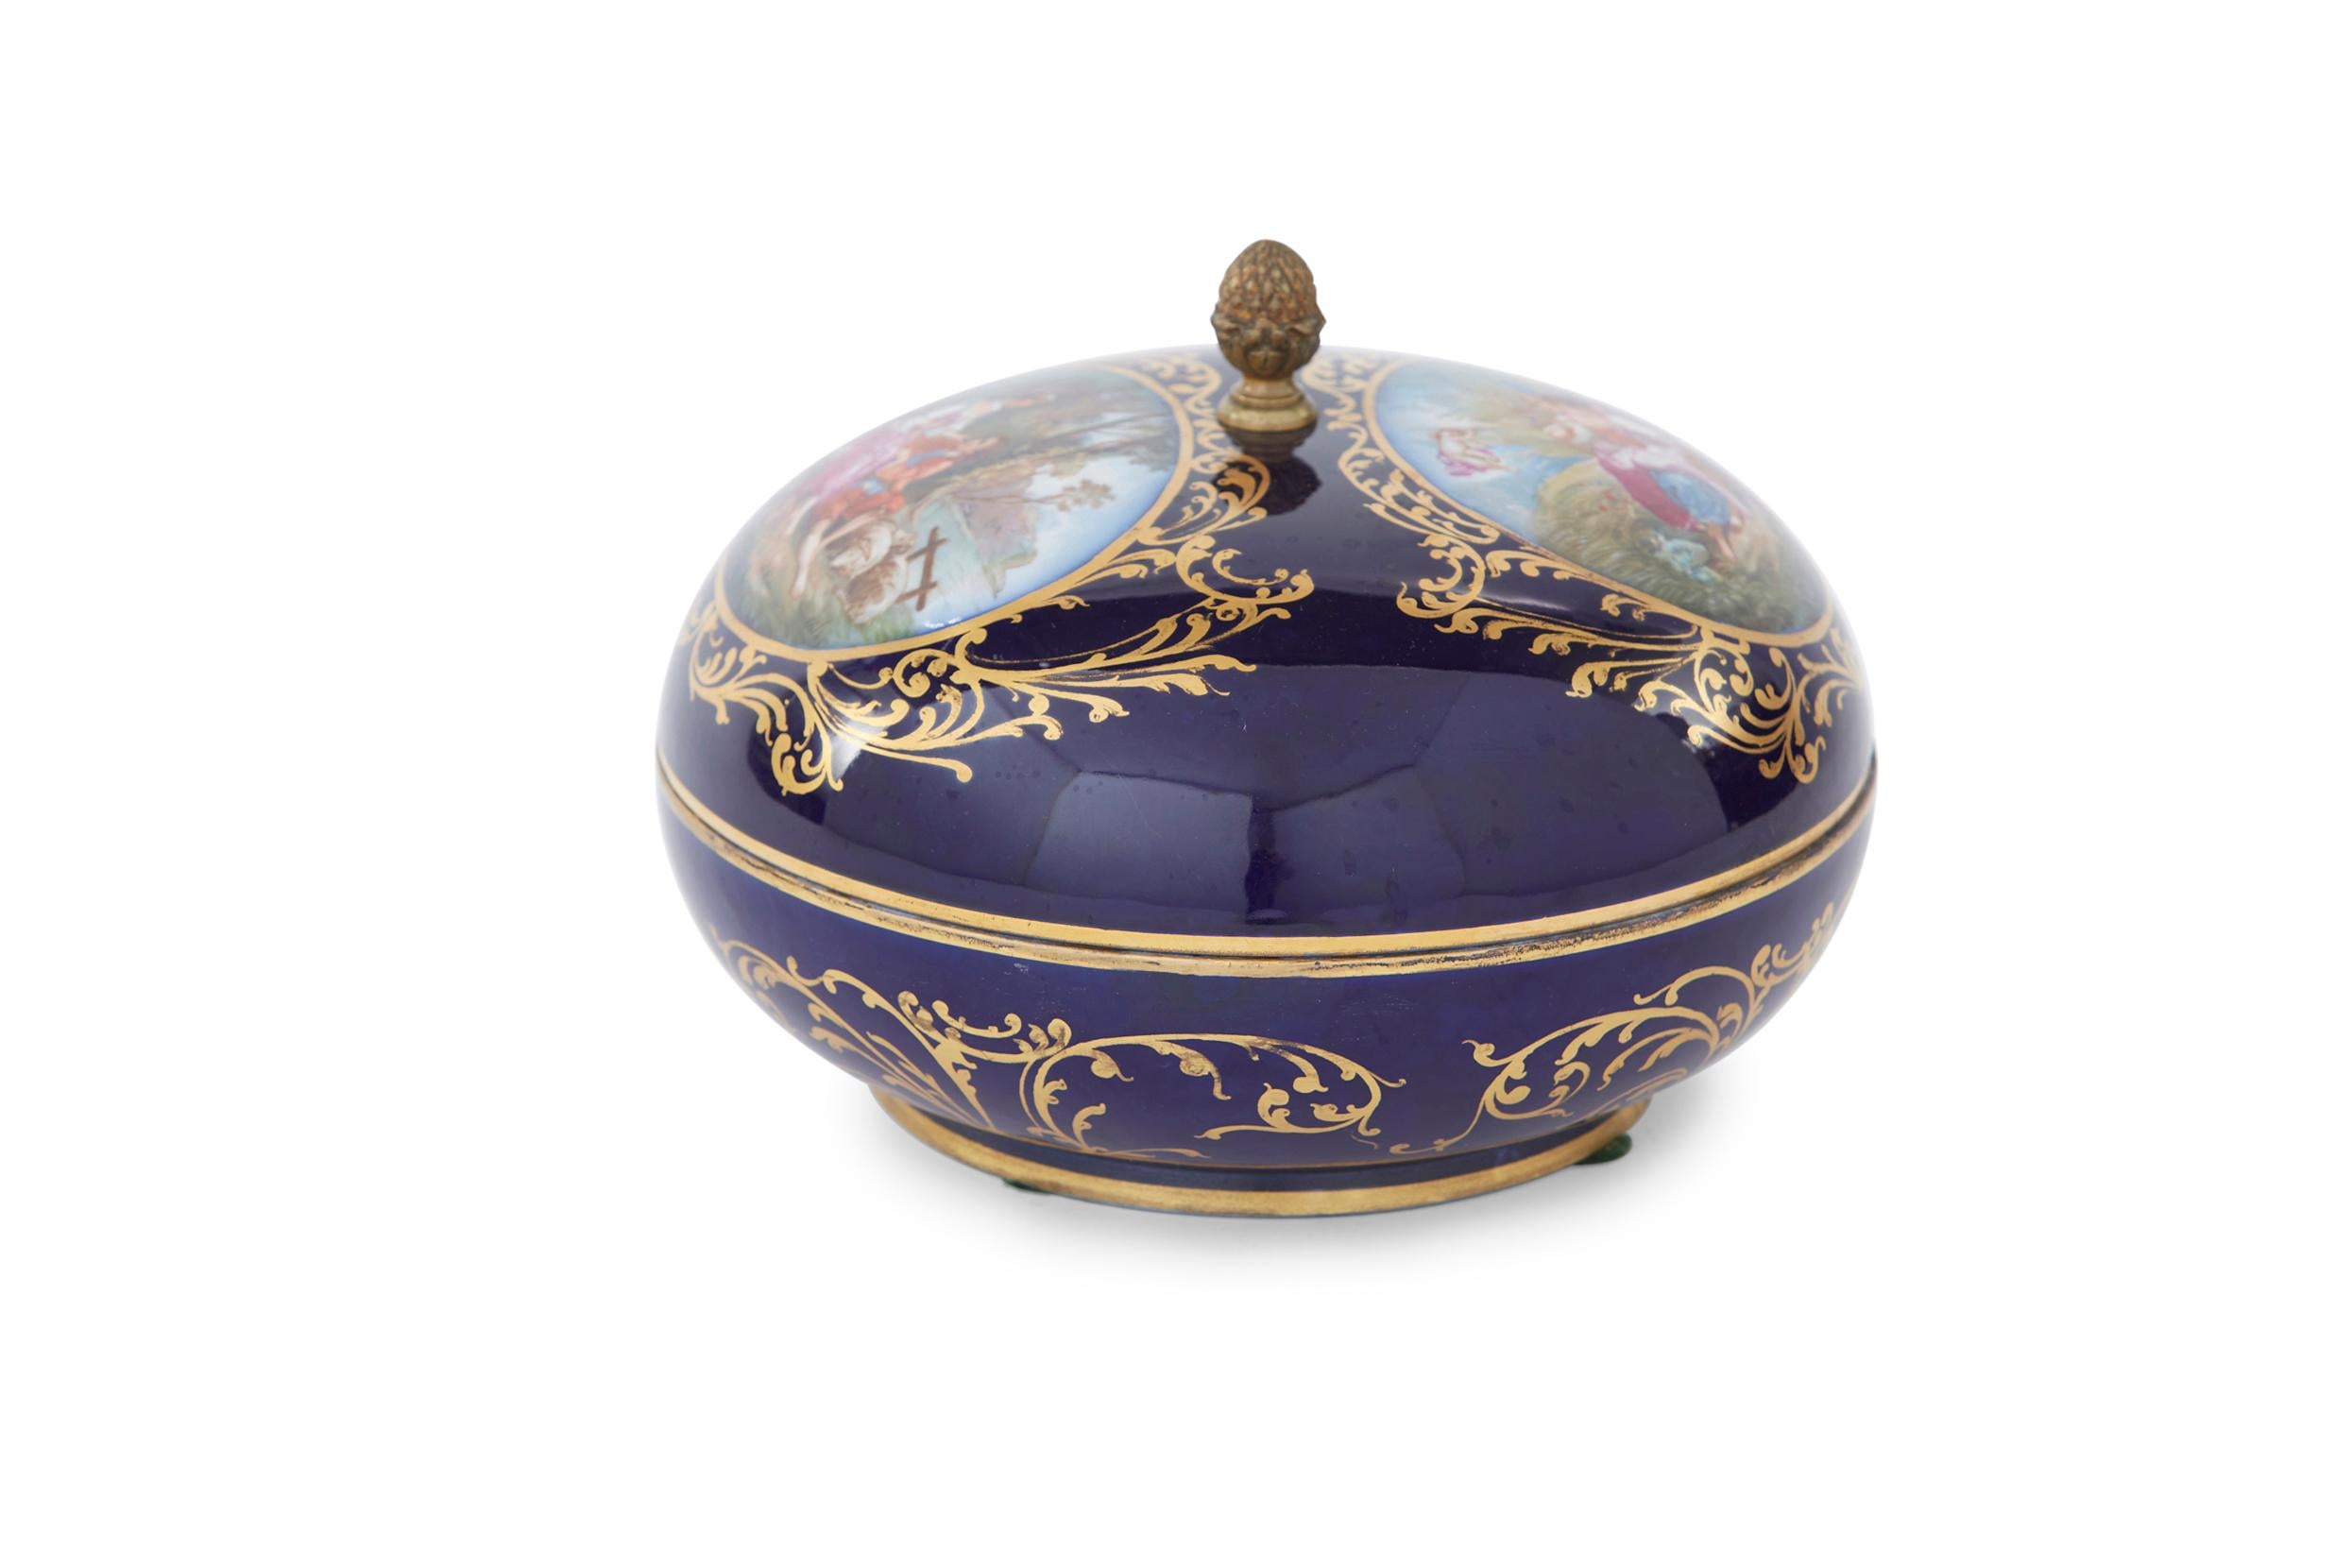 Early 20th century large Limoges porcelain covered vanity Box. Valny Limoges Chateau De Tuileries with interior floral & exterior scenes design details. The covered vanity box is in great condition. Minor wear consistent with age / use. Maker's mark